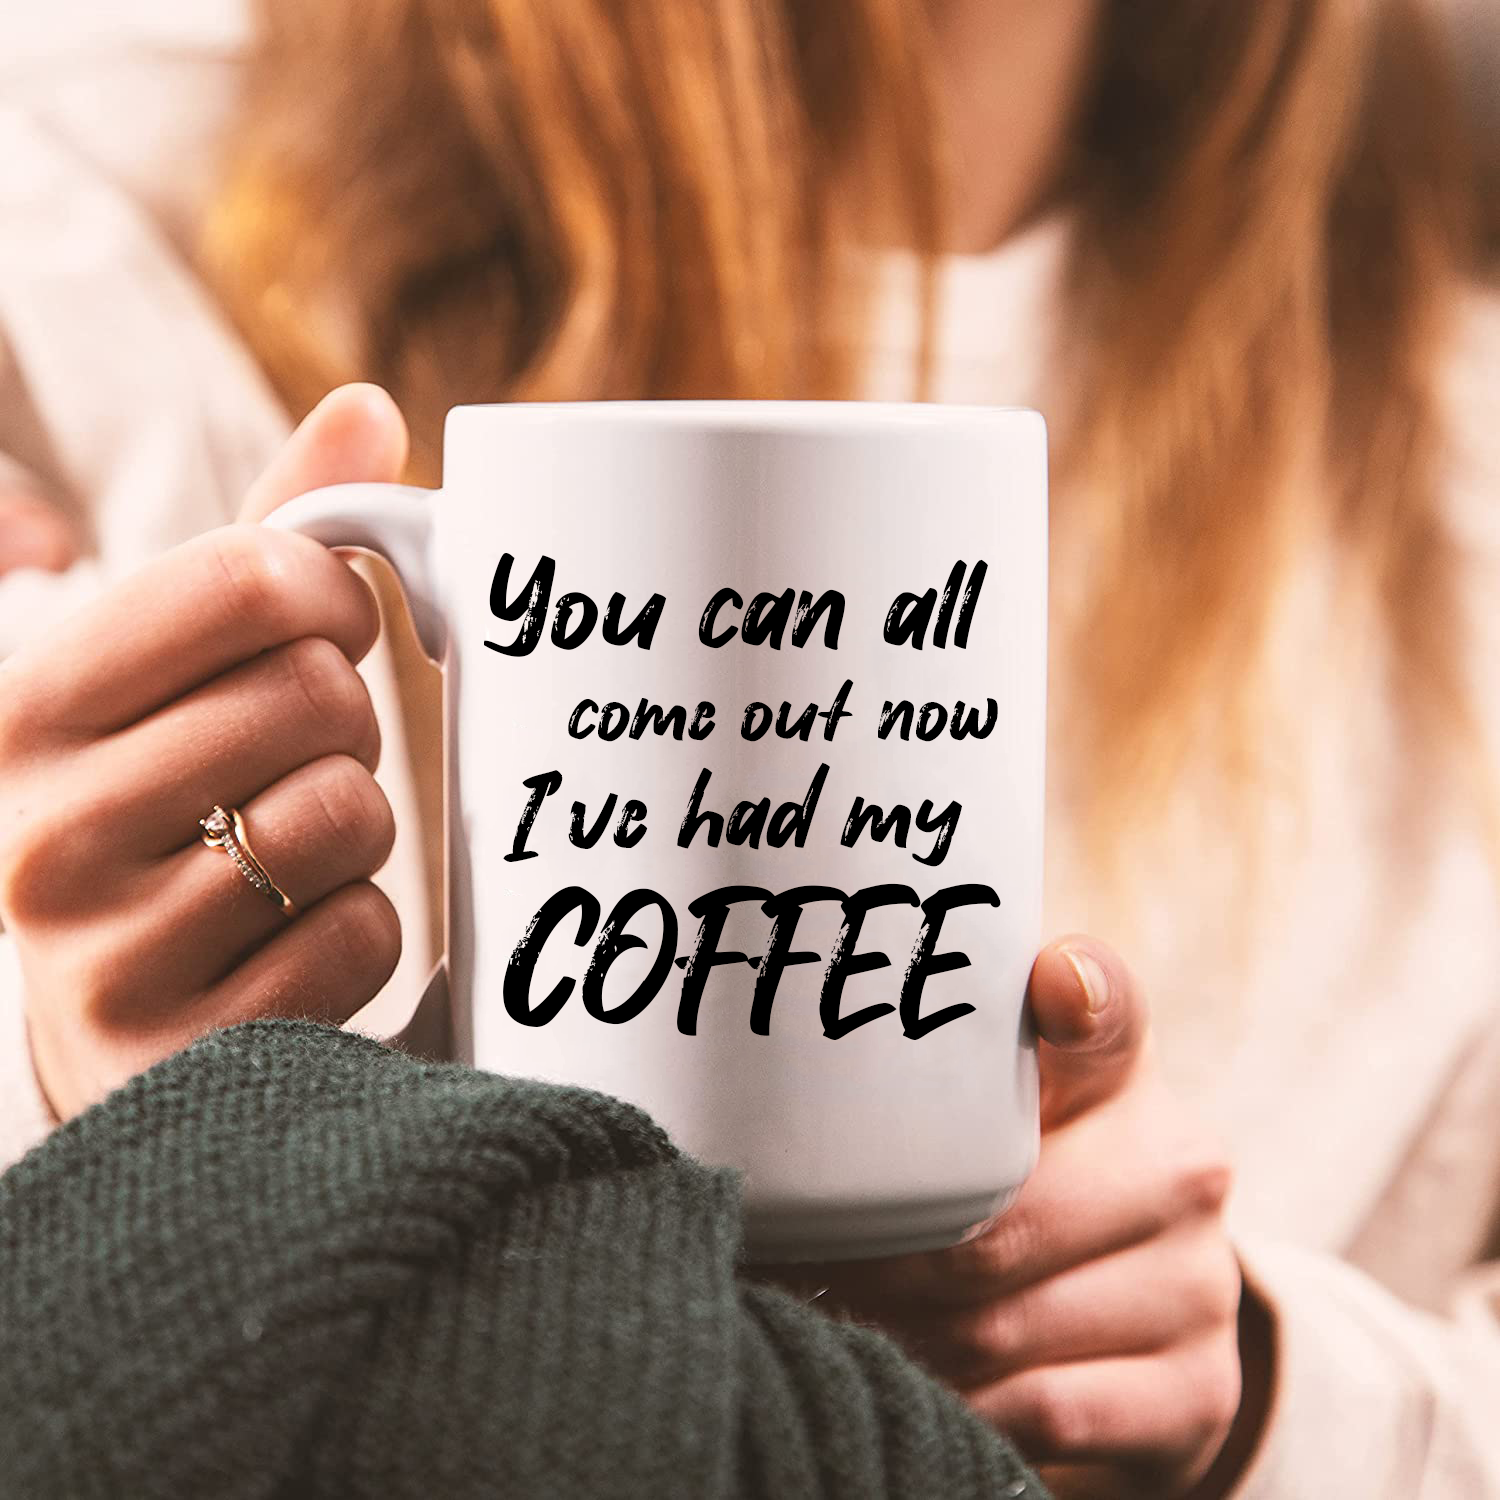 "Come Out Now" Funny Coffee Mug 15oz - Switzer Kreations